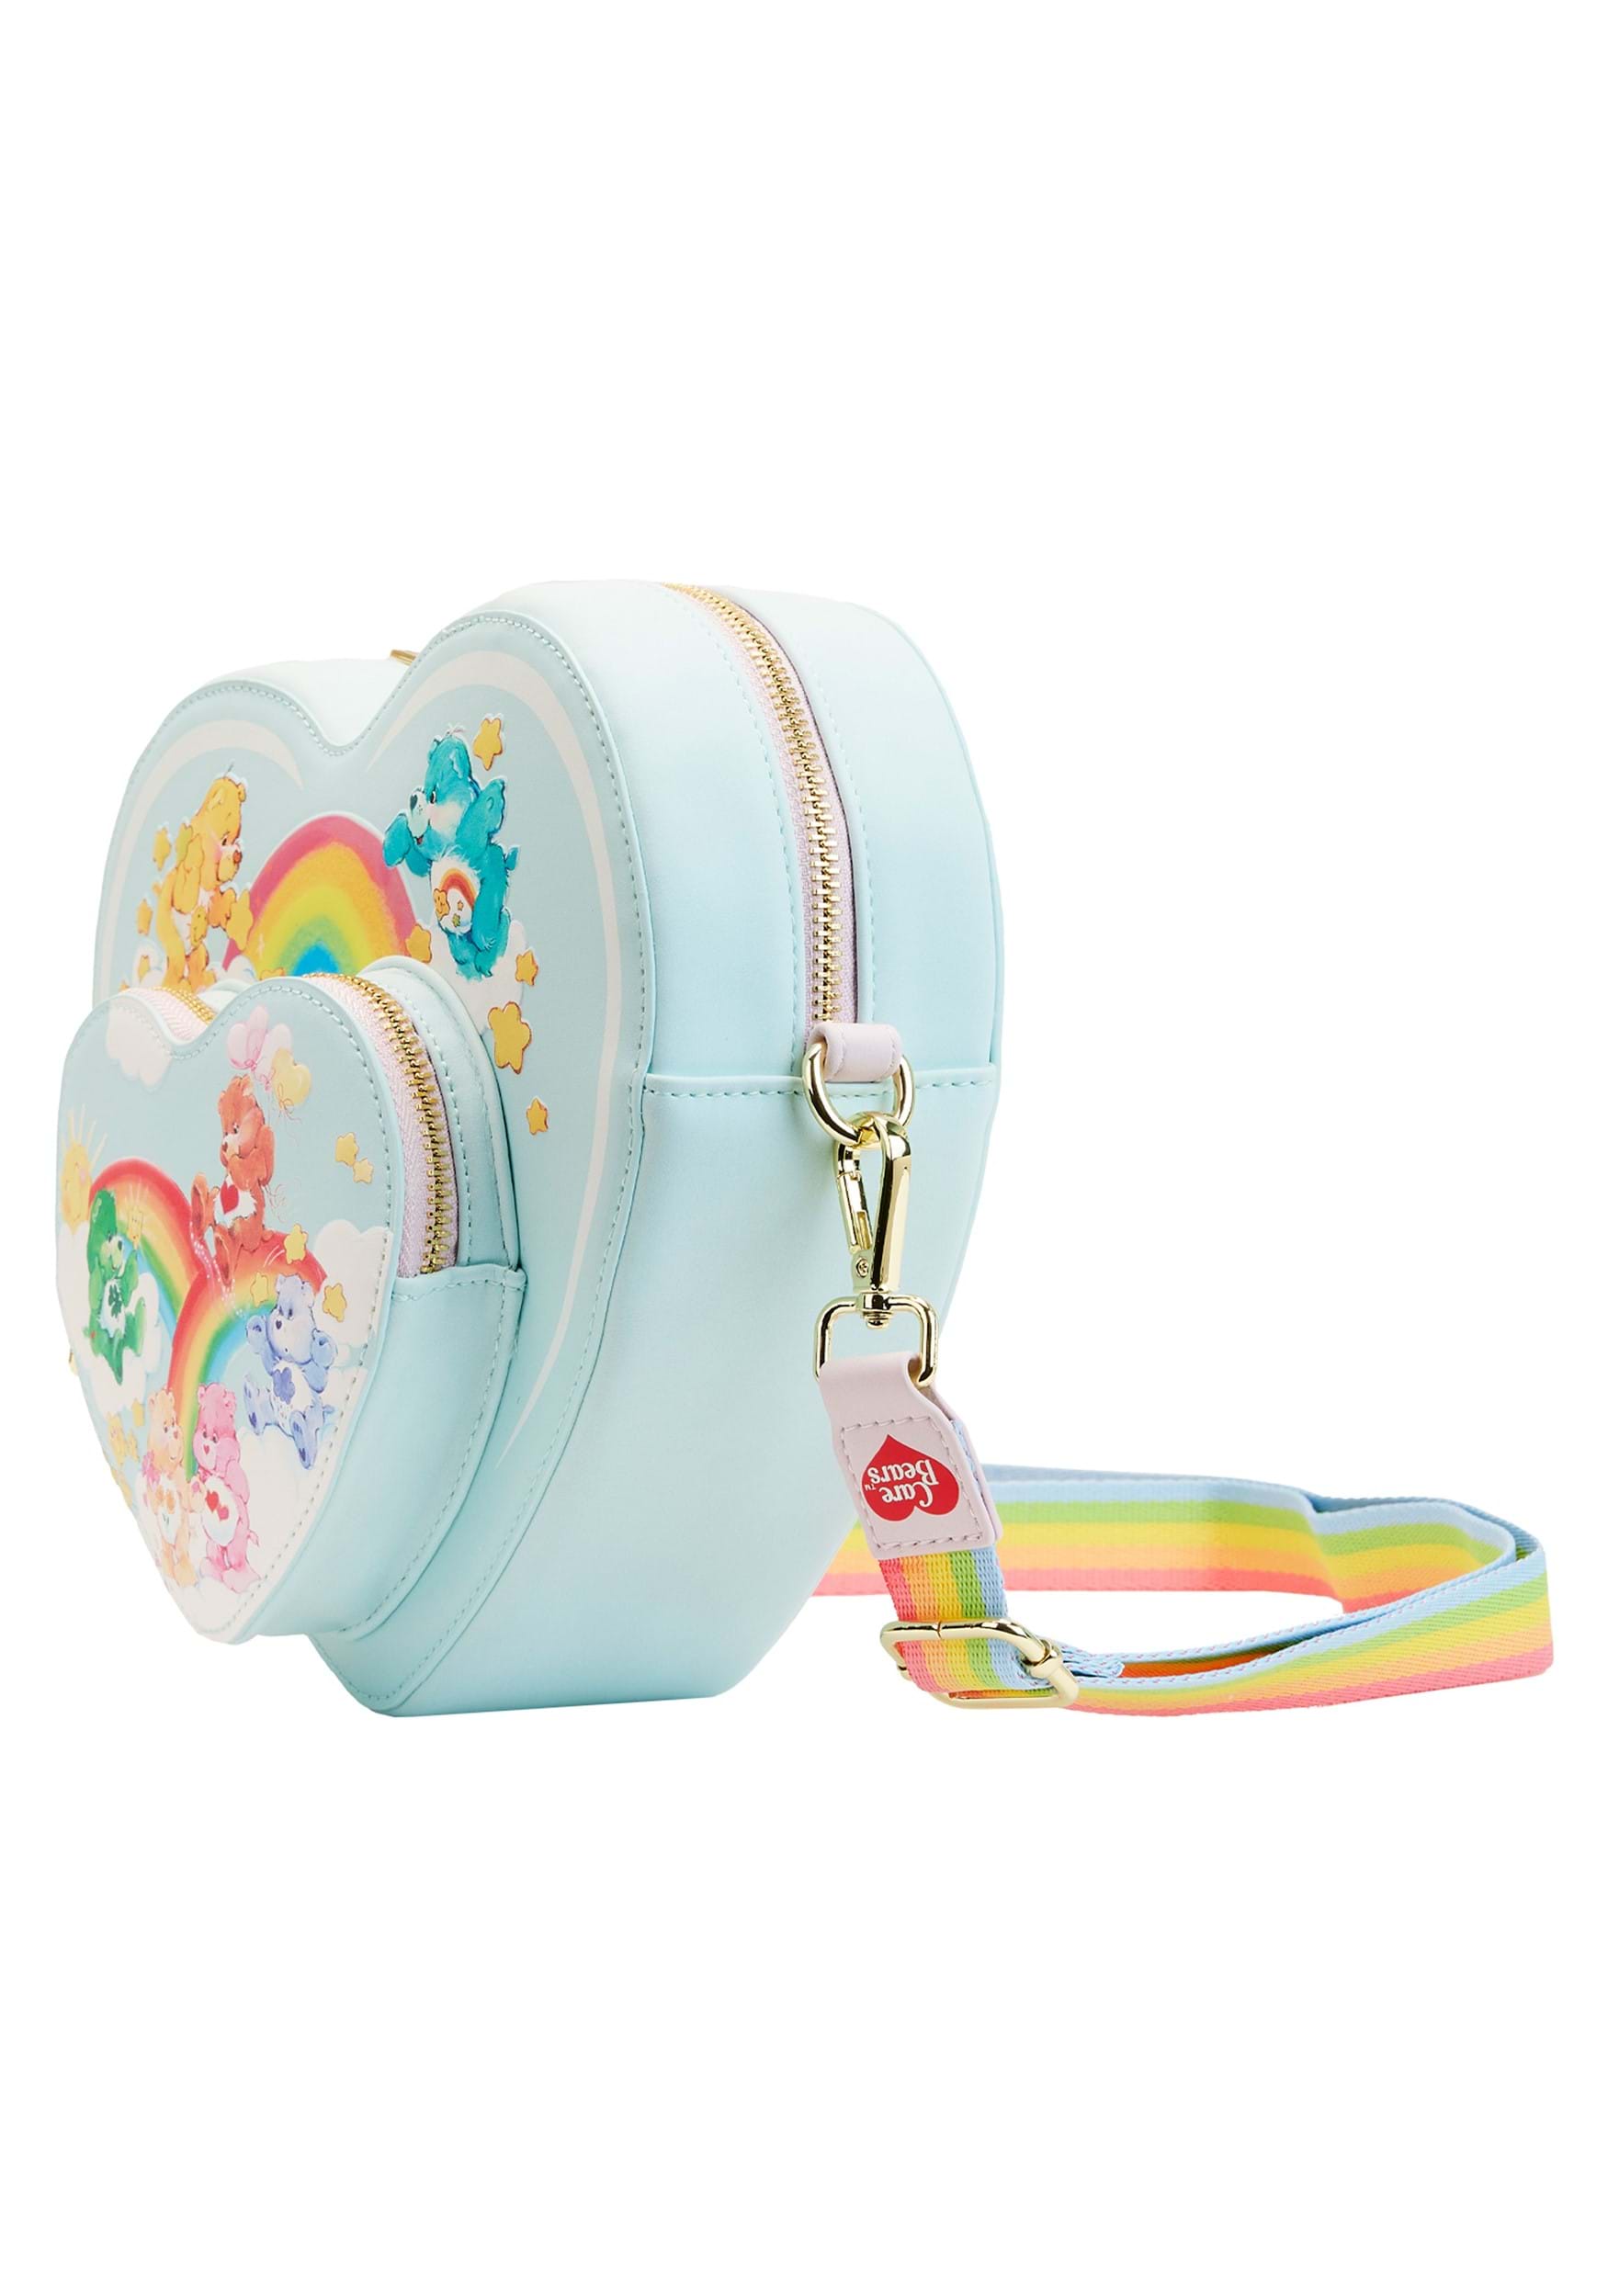 Loungefly Carebears and Cousins Lunch Box Crossbody Bag